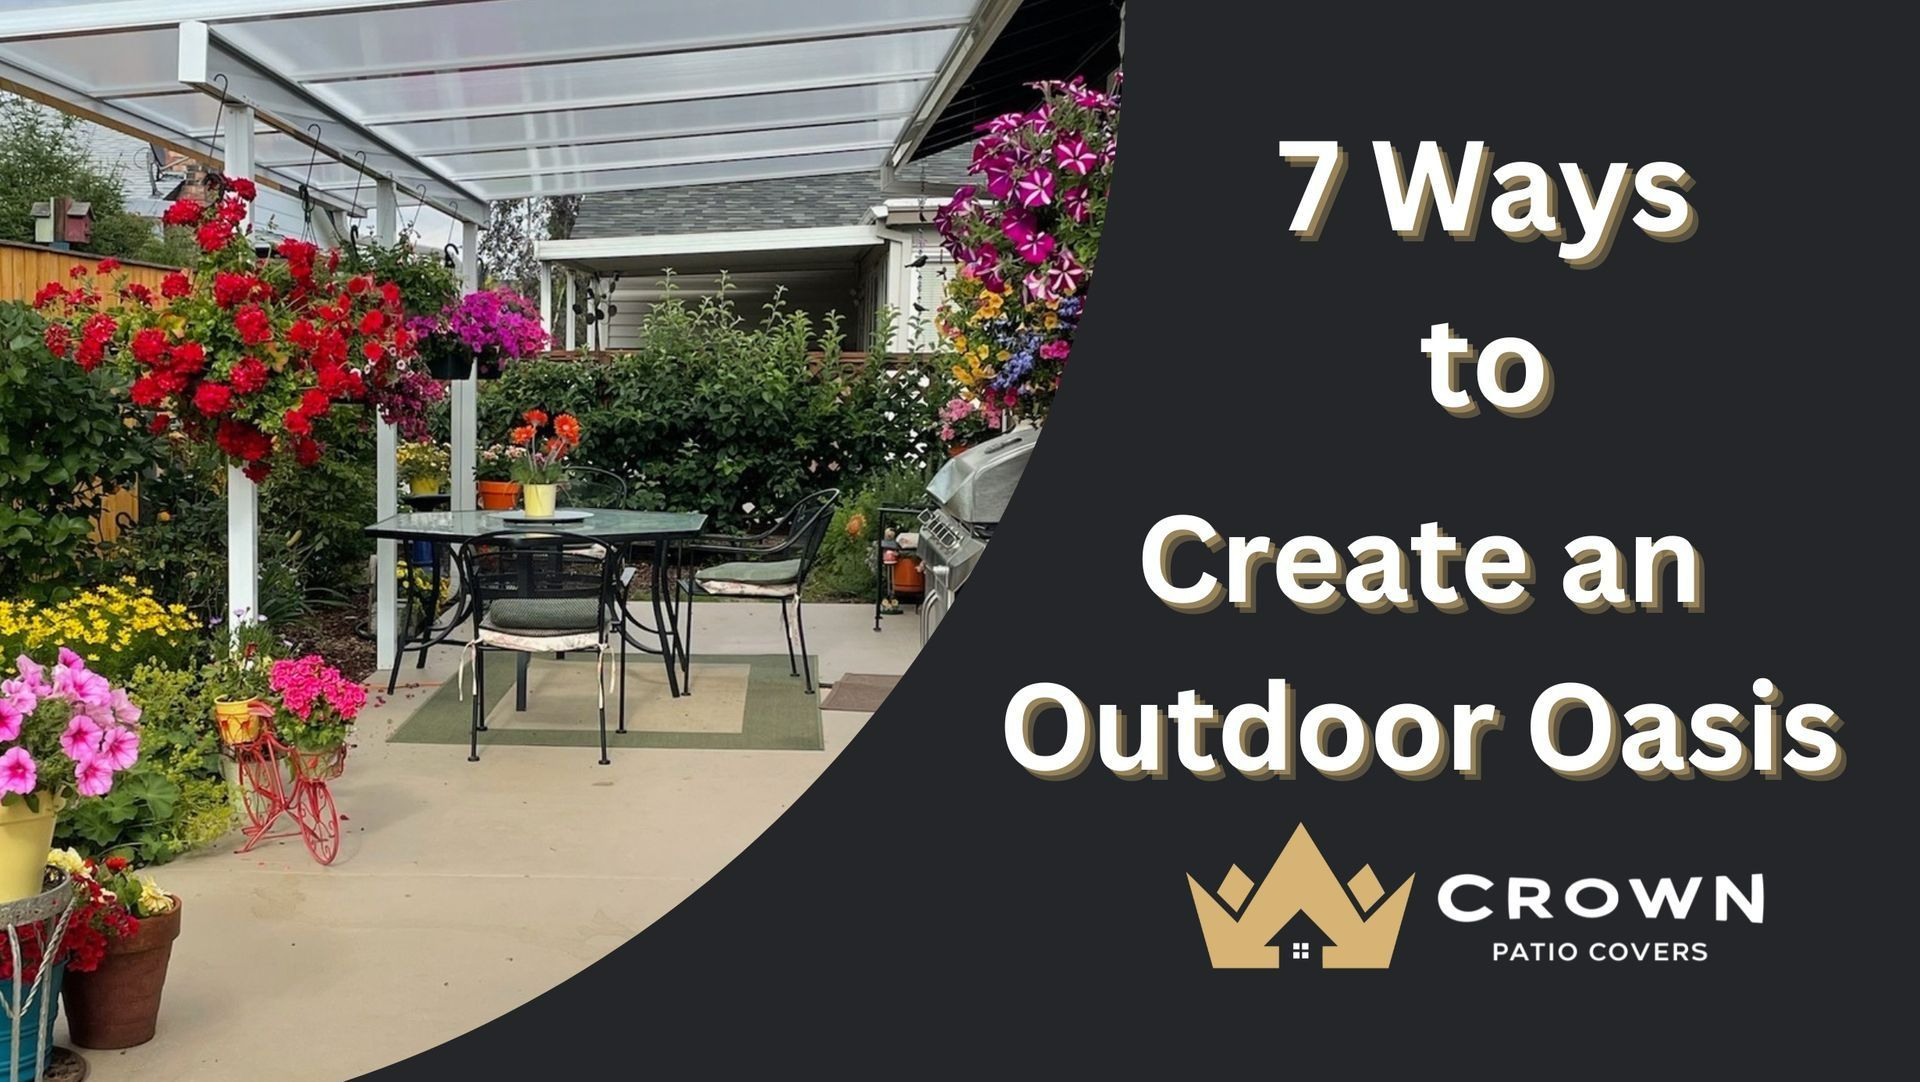 7 Ways to Create an Outdoor Oasis